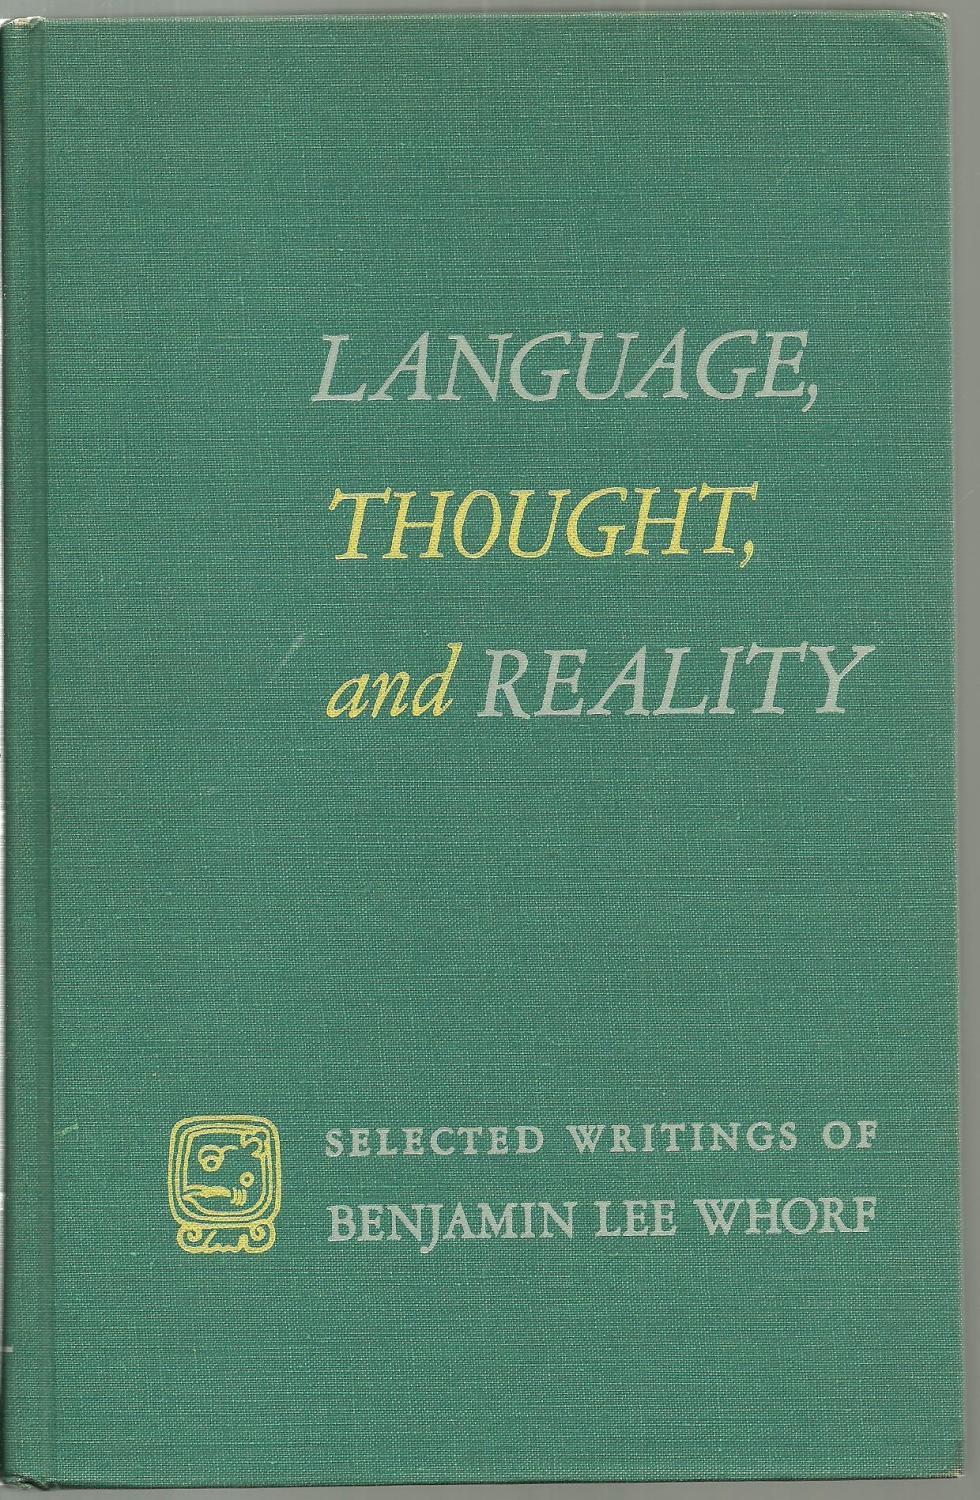 Language, Thought, and Reality, Selected Writings by Benjamin Lee Whorf by  Edited and with an introduction by John B. Carroll, Foreword by Stuart  Chase: Very Good Hardcover (1957) | Sabra Books